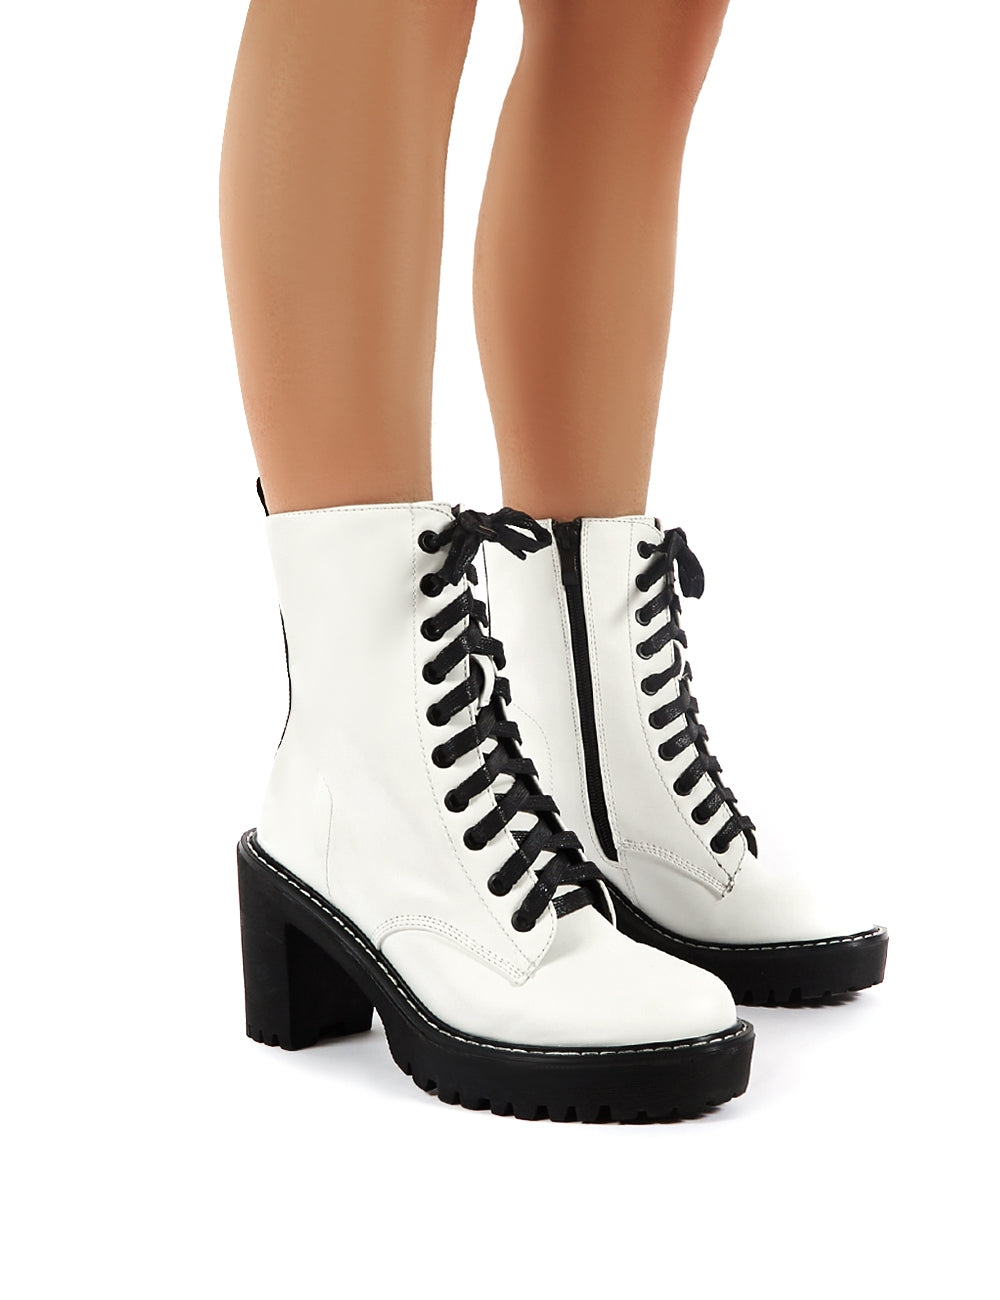 White Lace-Up Boots - Chunky Platform Boots - Cool Mid-Calf Boots - Lulus